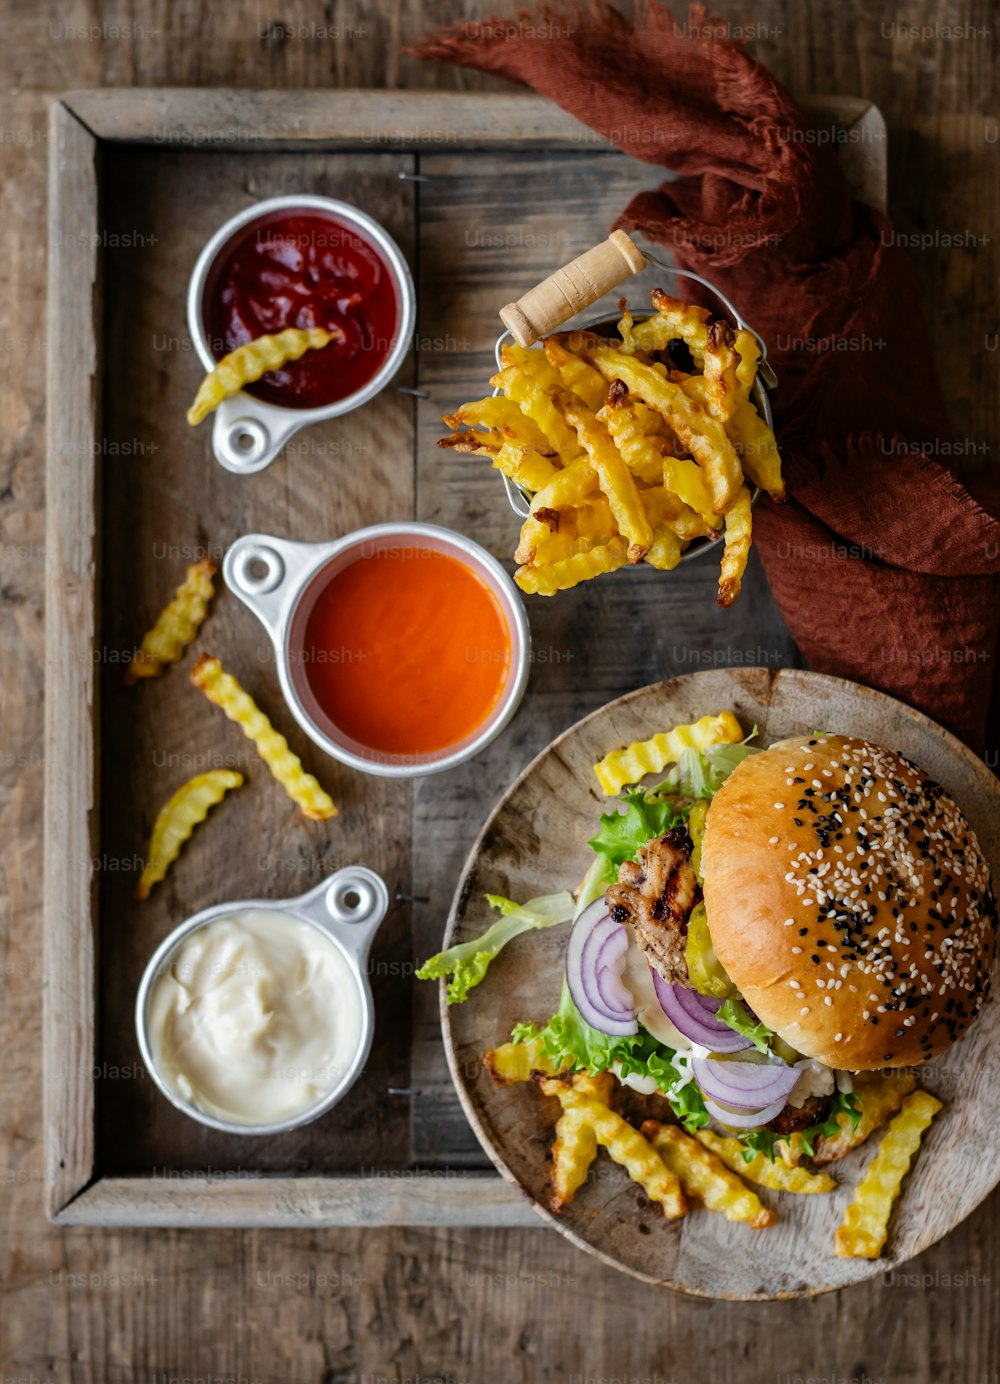 a tray with a burger, fries and ketchup